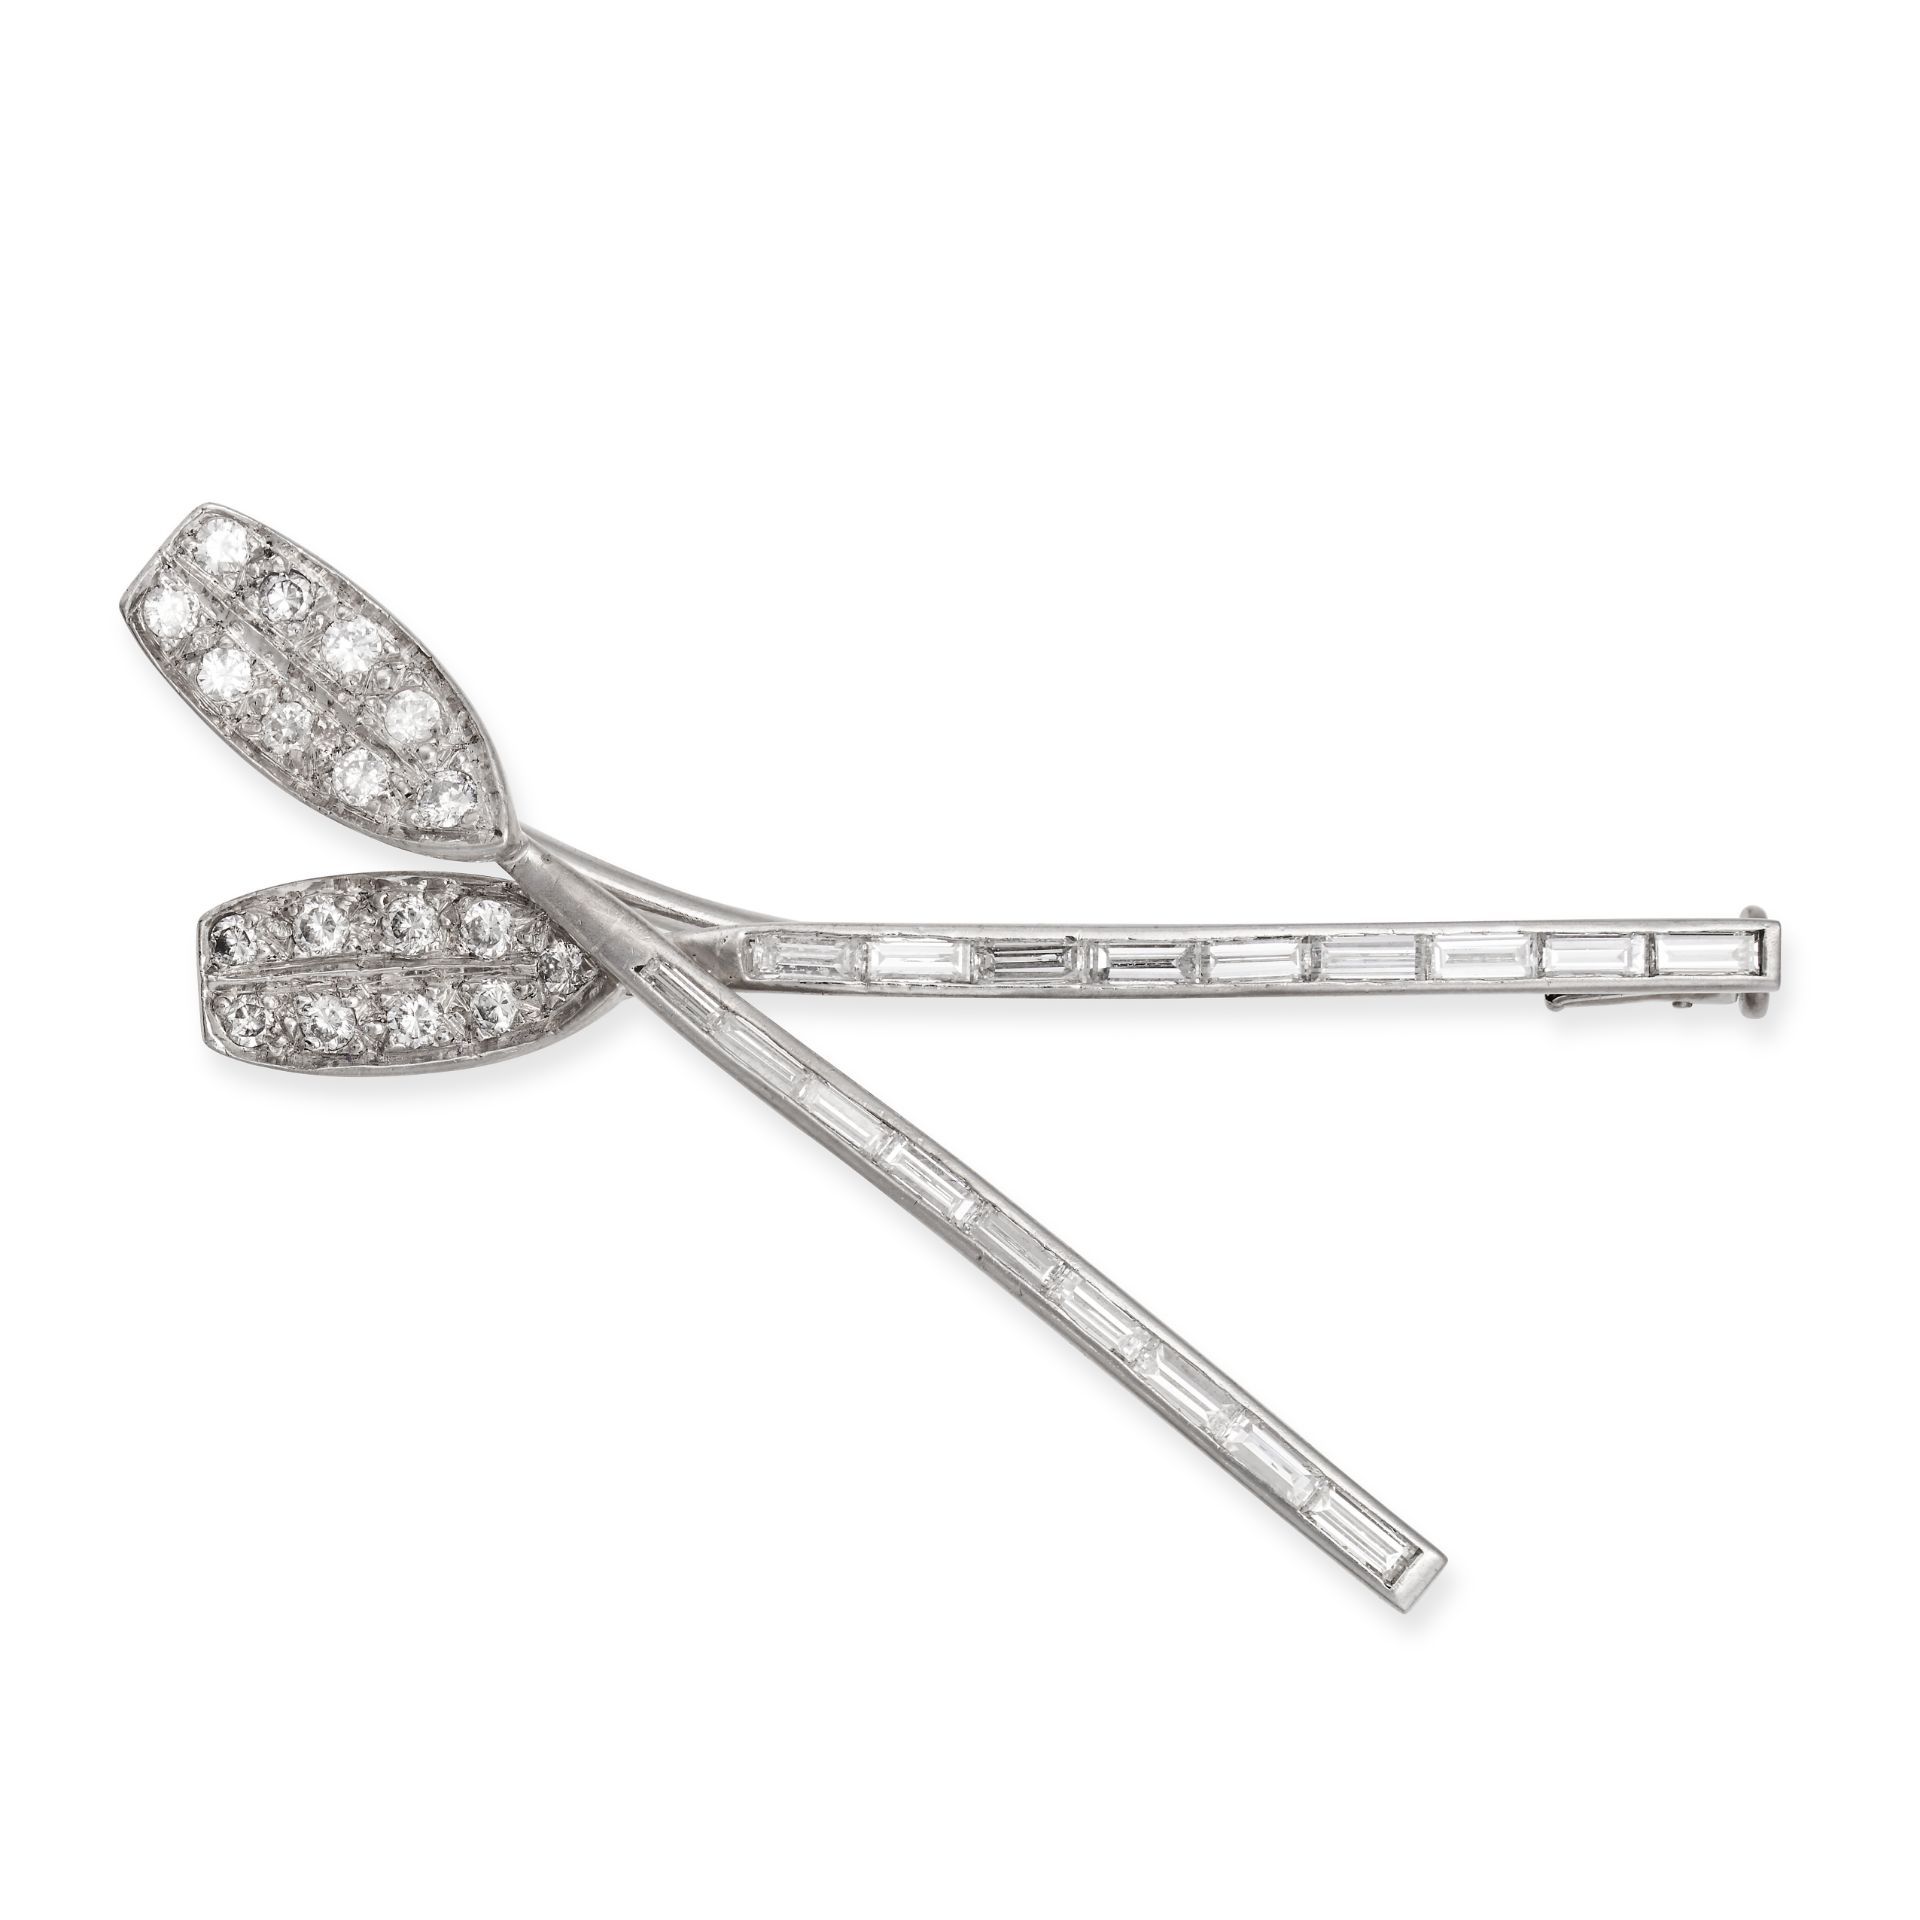 A DIAMOND OARS BROOCH in white gold, designed as two crossed rowing oars, set with round brillian...